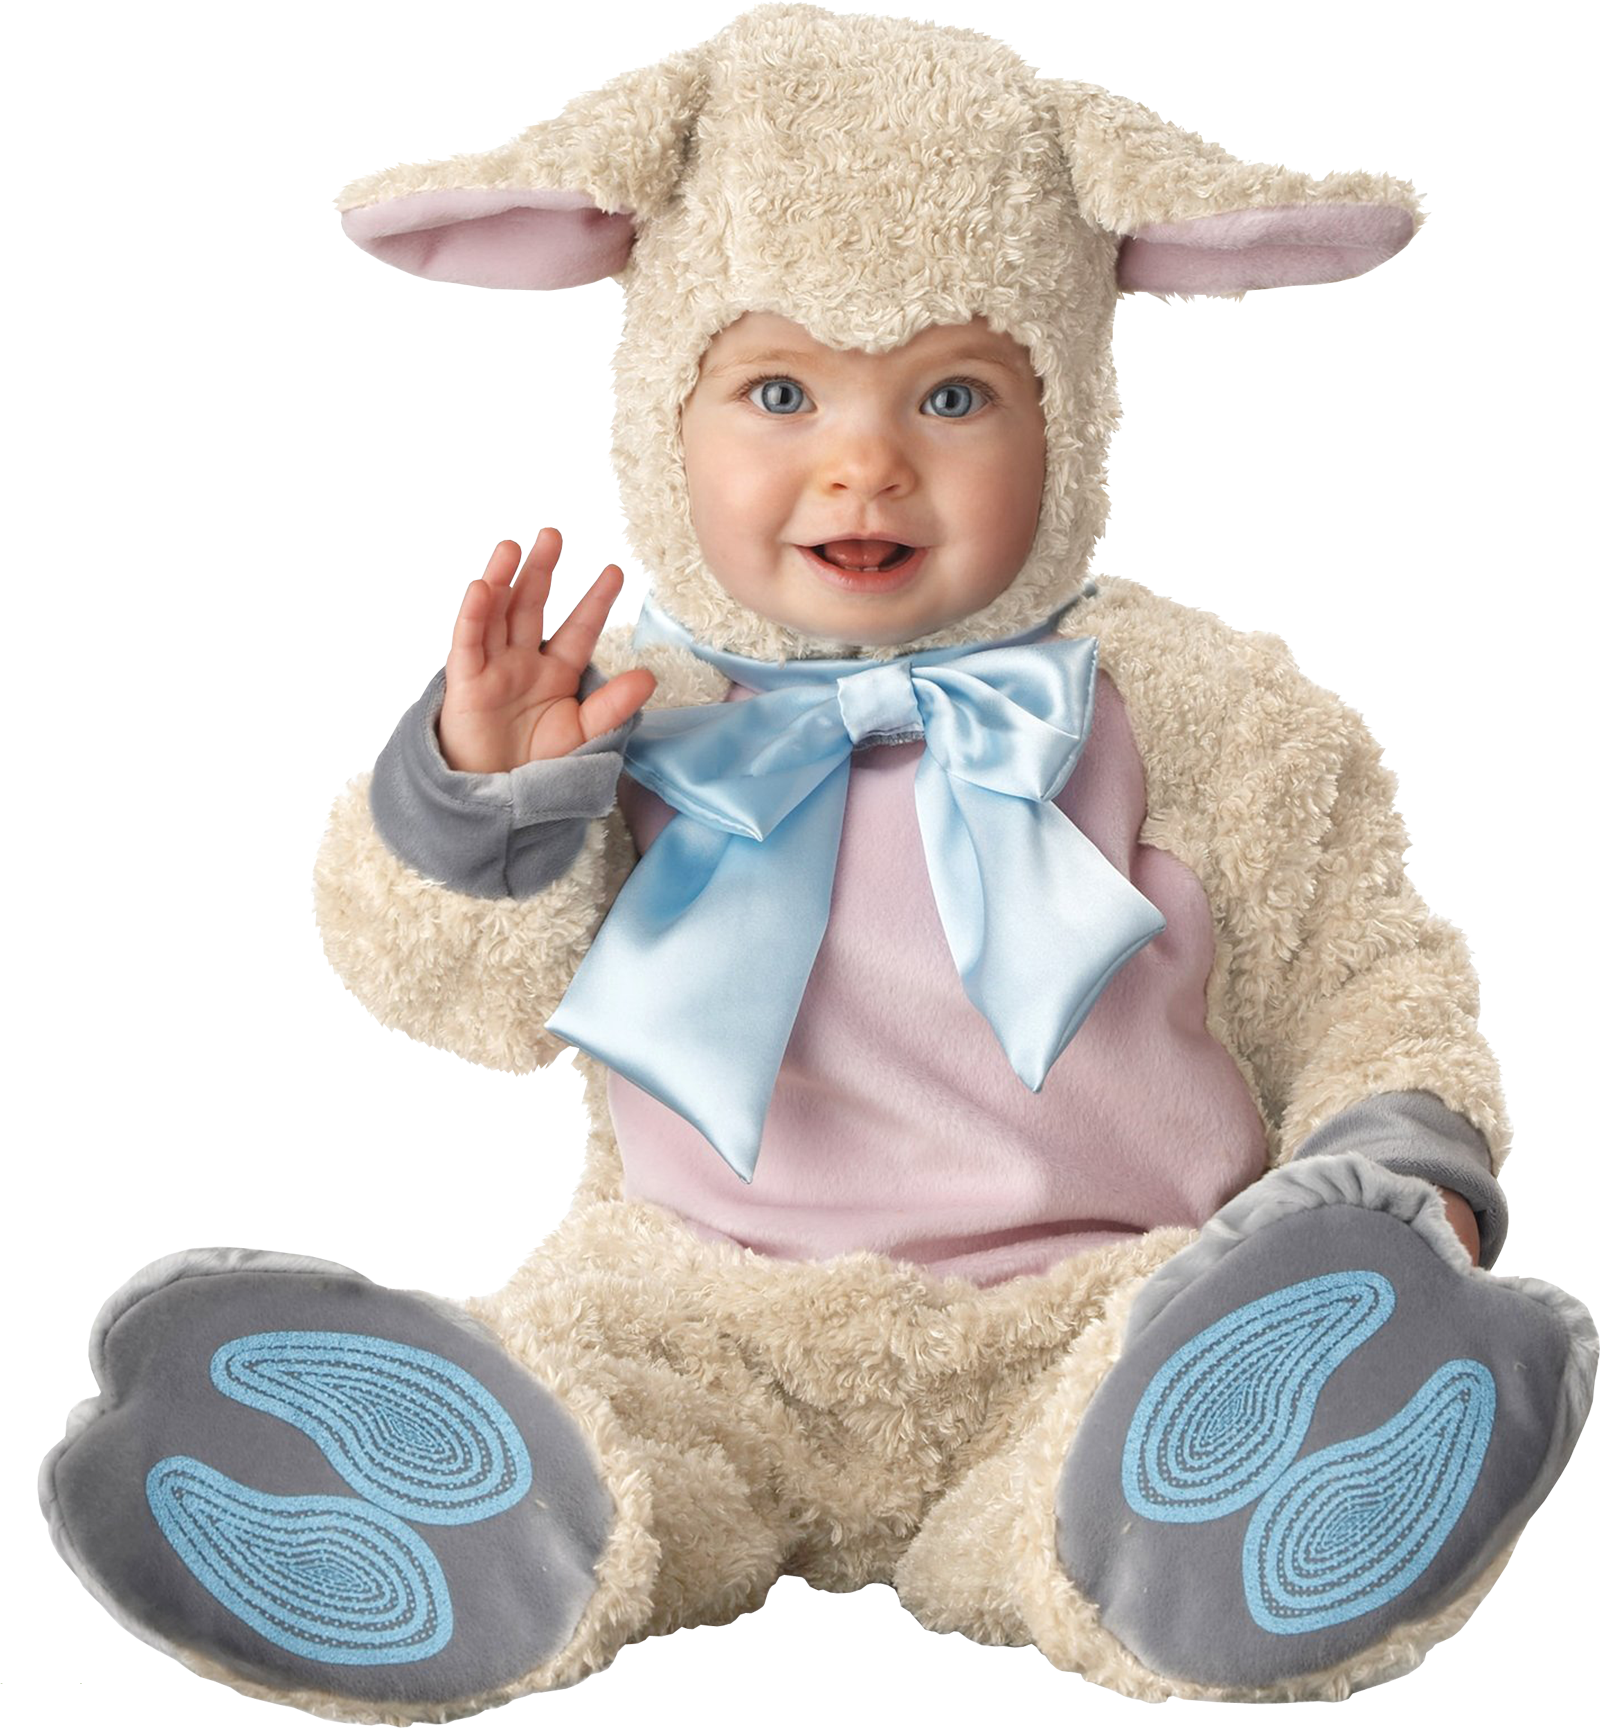 Cute Baby PNG Image